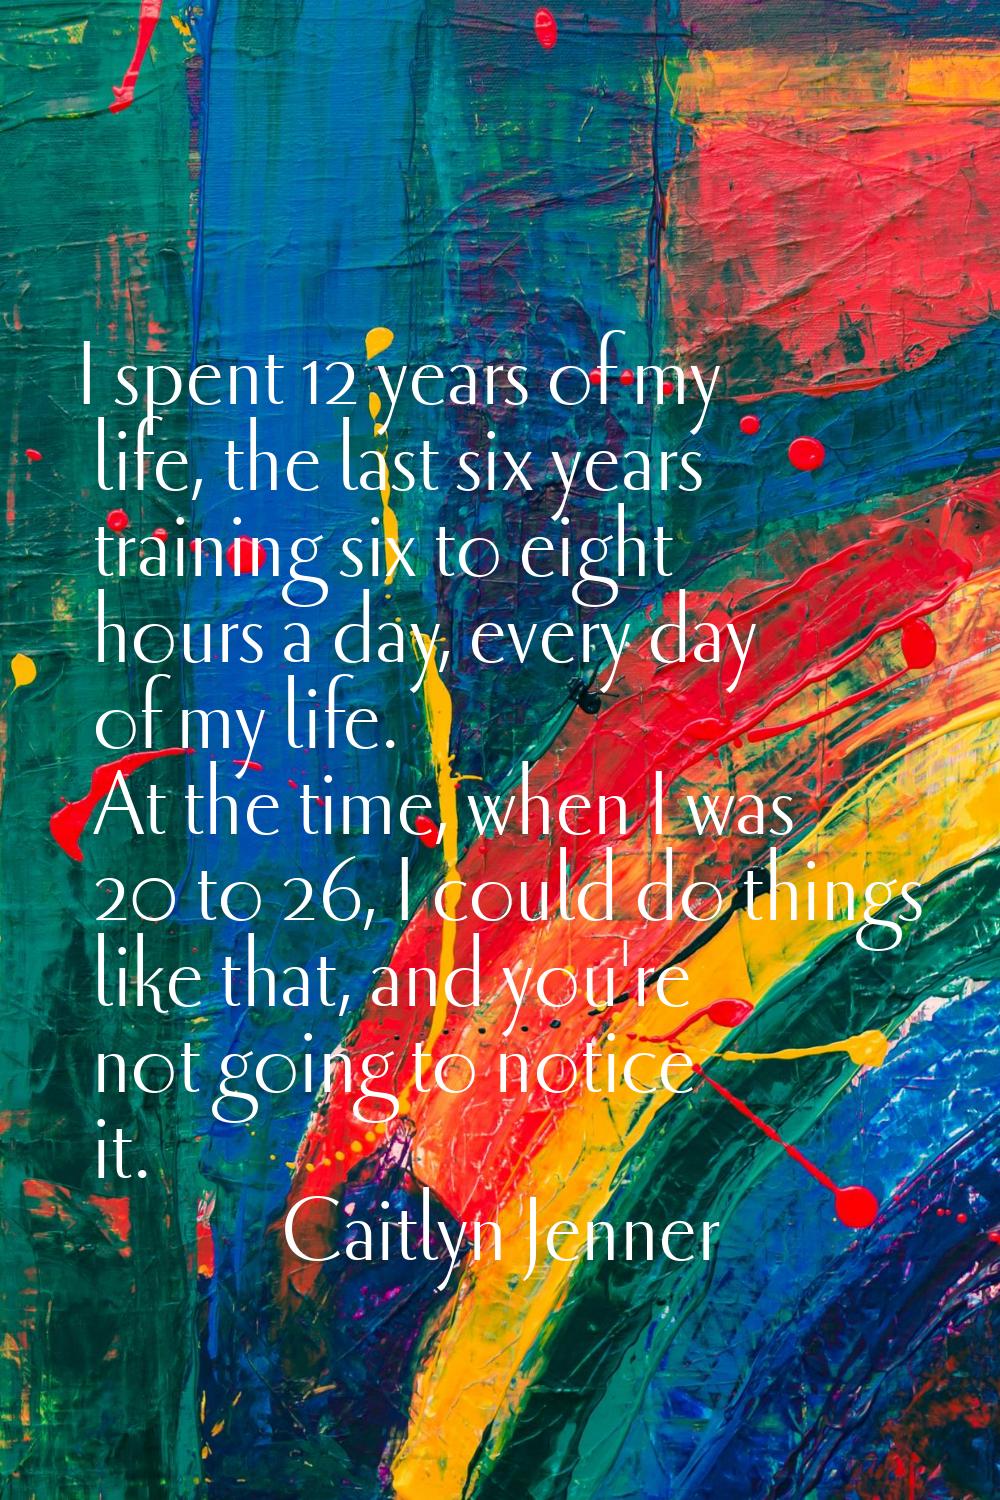 I spent 12 years of my life, the last six years training six to eight hours a day, every day of my 